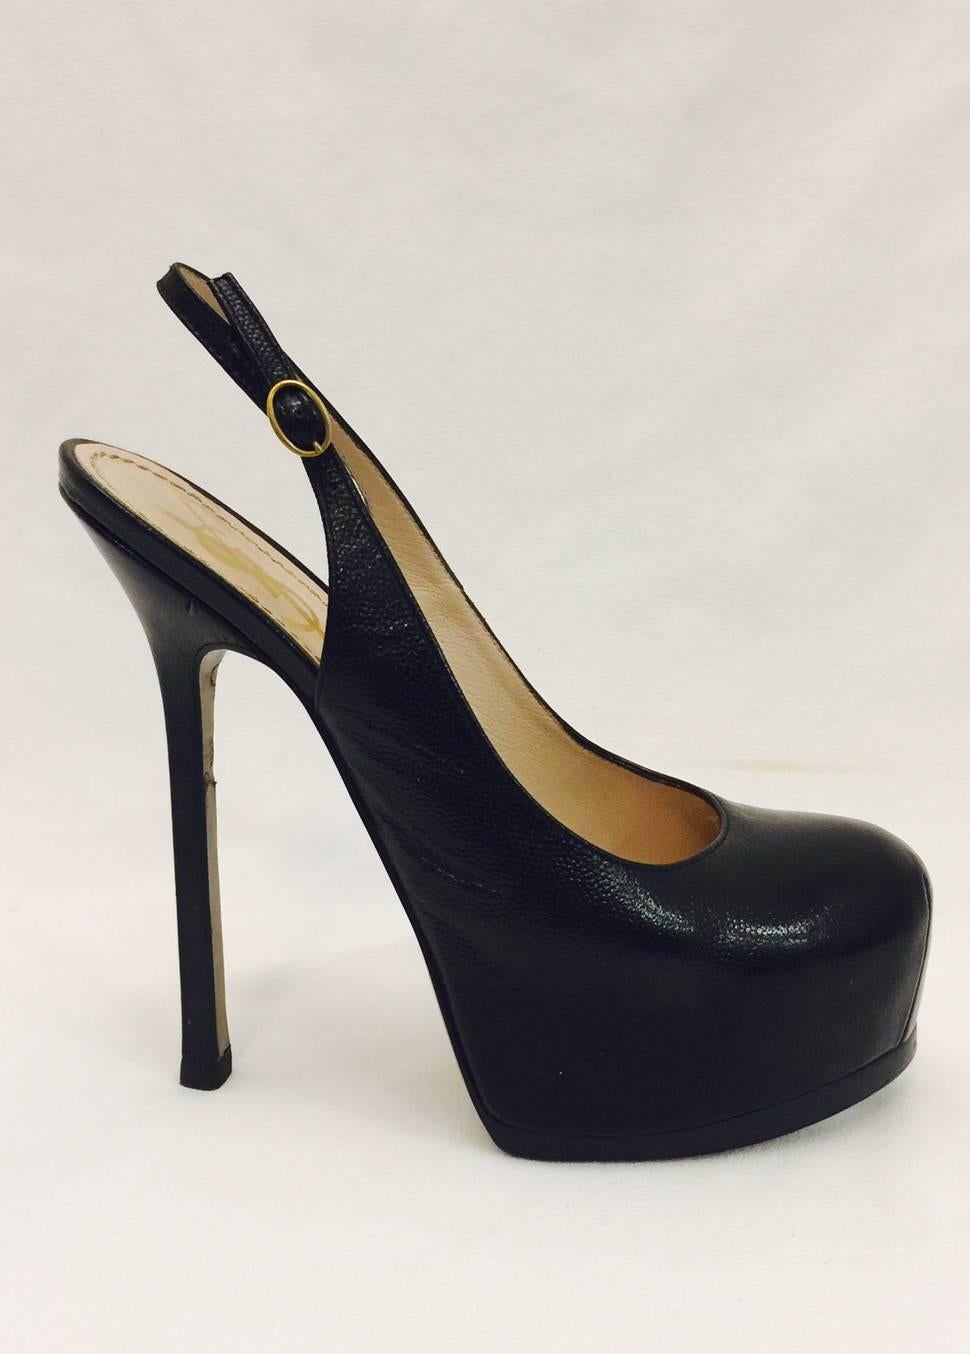 These High Heel Sling Backs illustrate why Yves was considered 